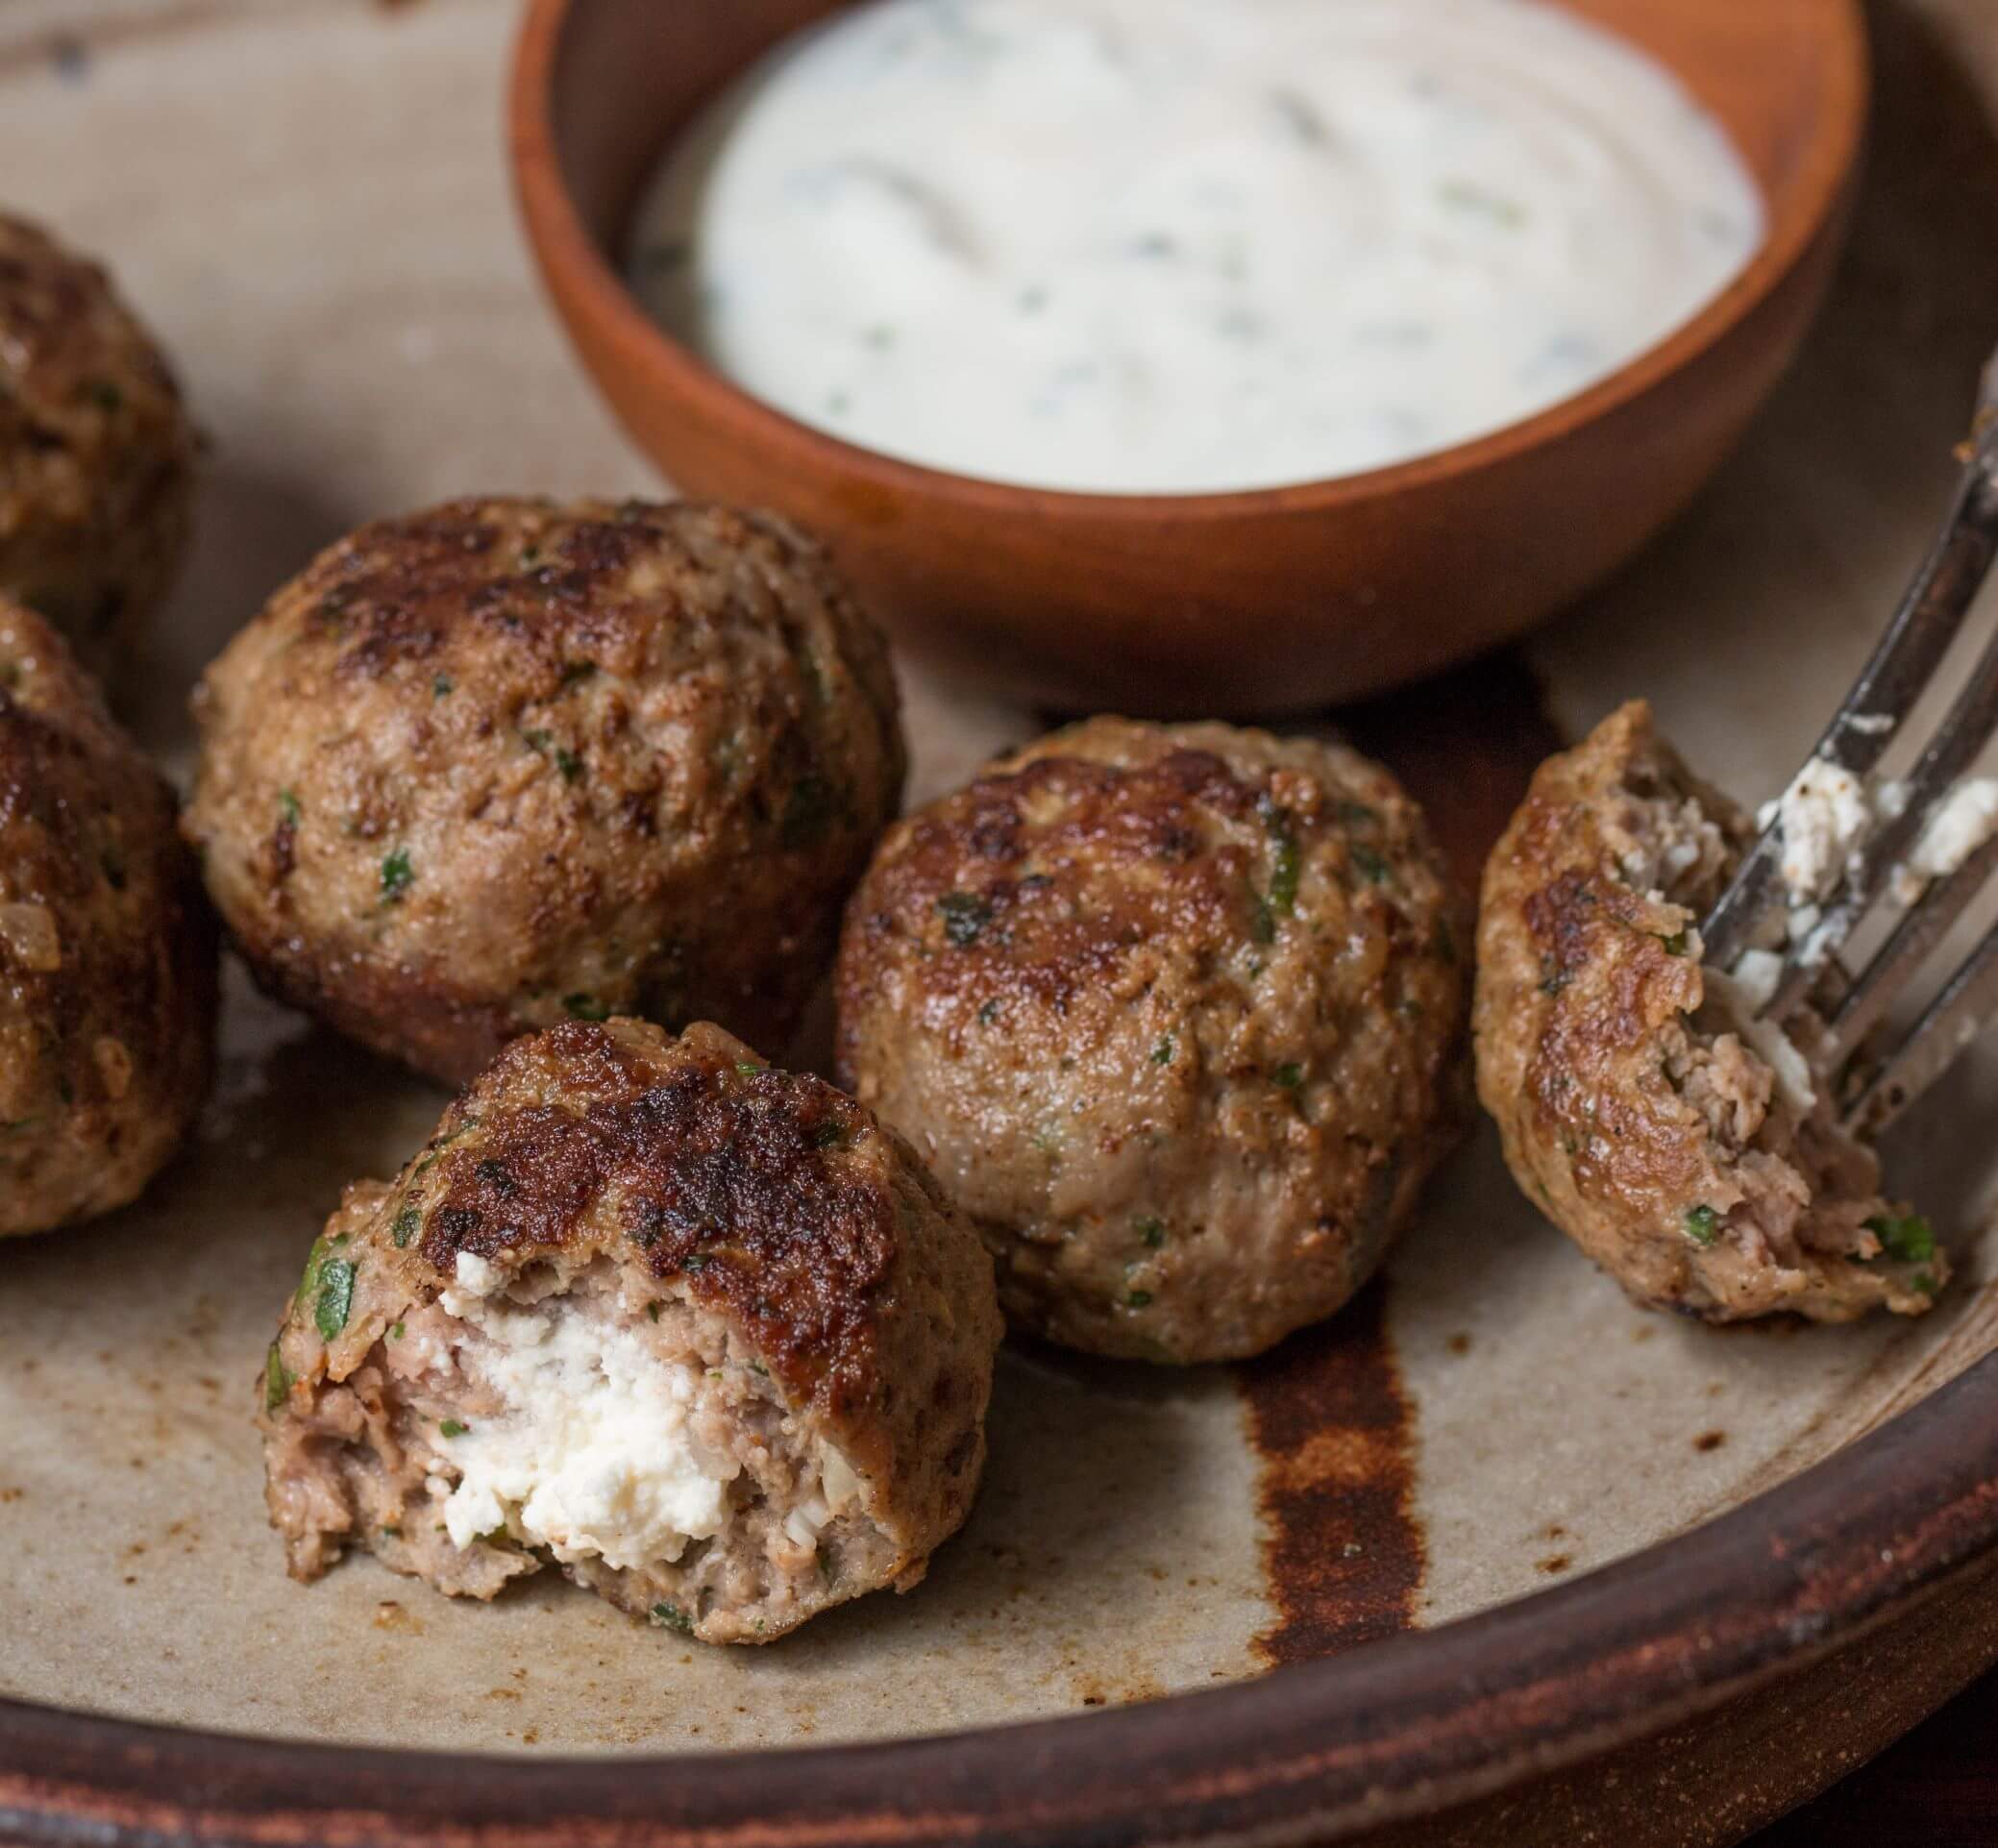 Cooked, stuffed lamb meatballs cut open to reveal the goat cheese stuffing inside.